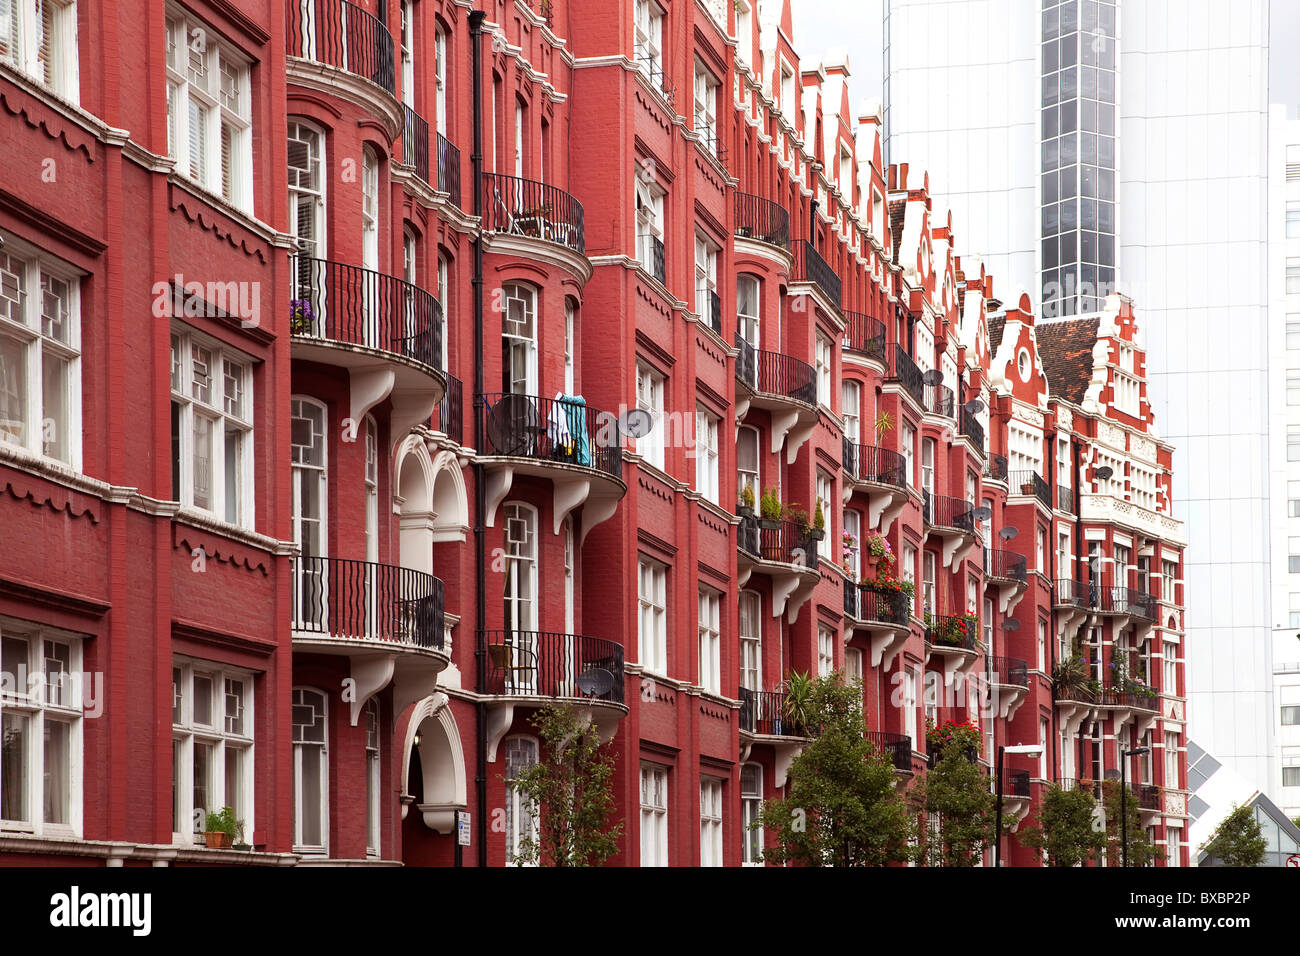 Row of houses with brick buildings, Victorian style, in London, England, United Kingdom, Europe Stock Photo